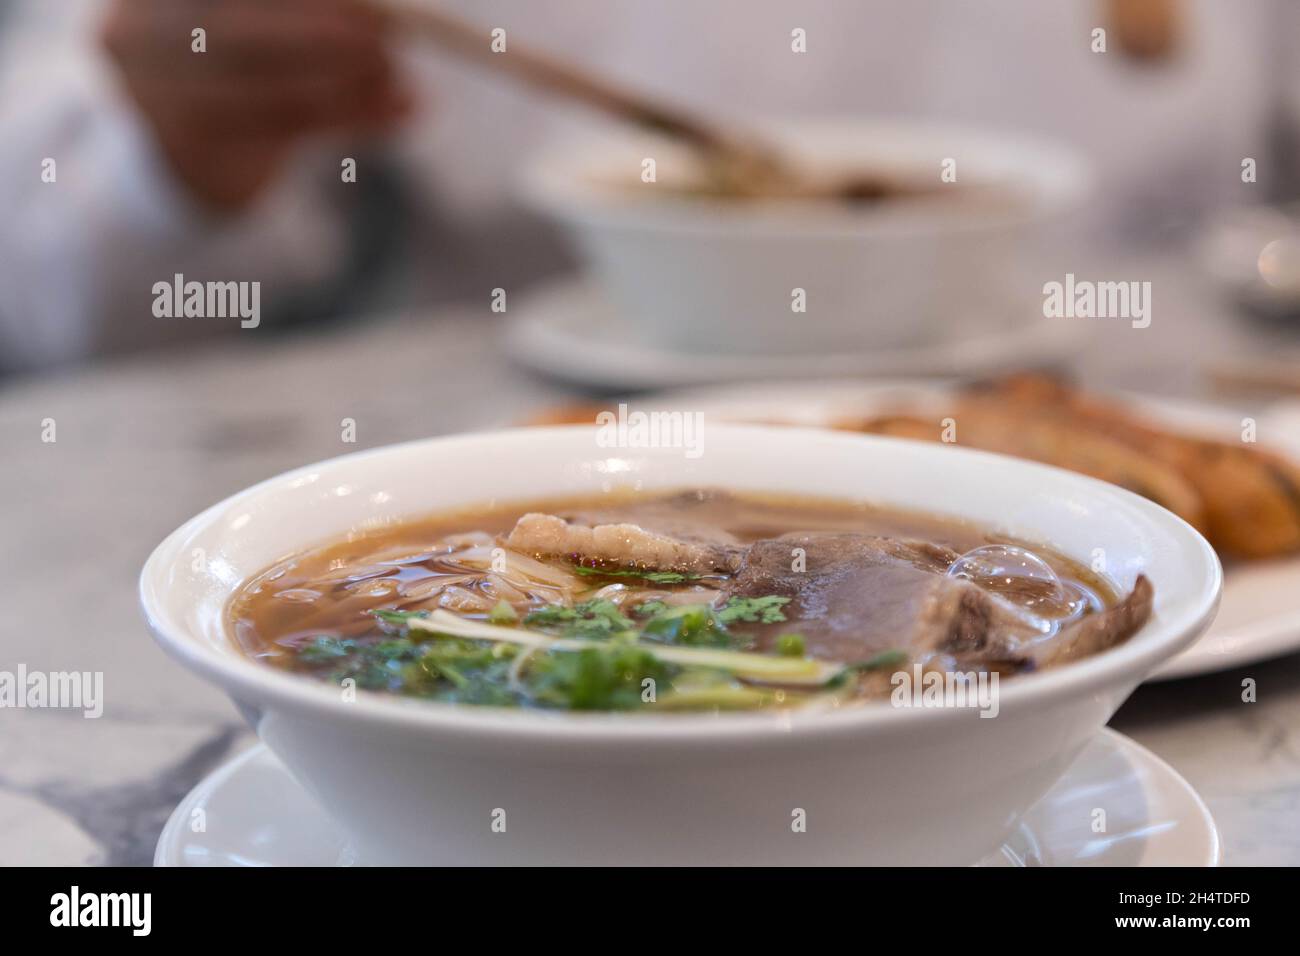 Delicious bowl of pho tai, rich broth, Vietnamese dish, soup, rice noodles. Stock Photo